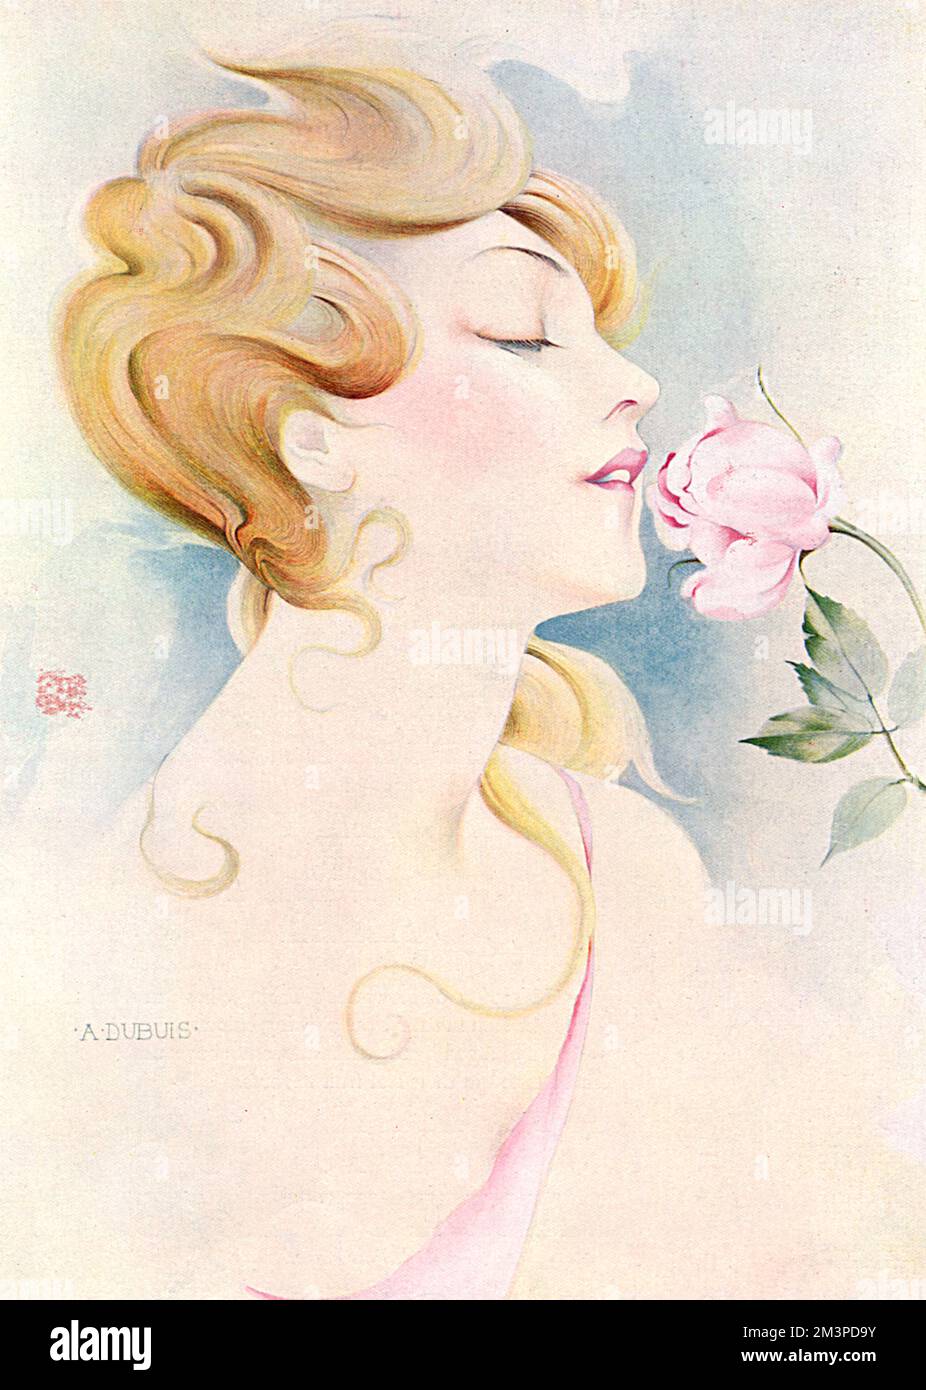 A romantic illustration showing a blonde woman with an English rose complexion inhaling the scent of a pink rose in full bloom.     Date: 1927 Stock Photo